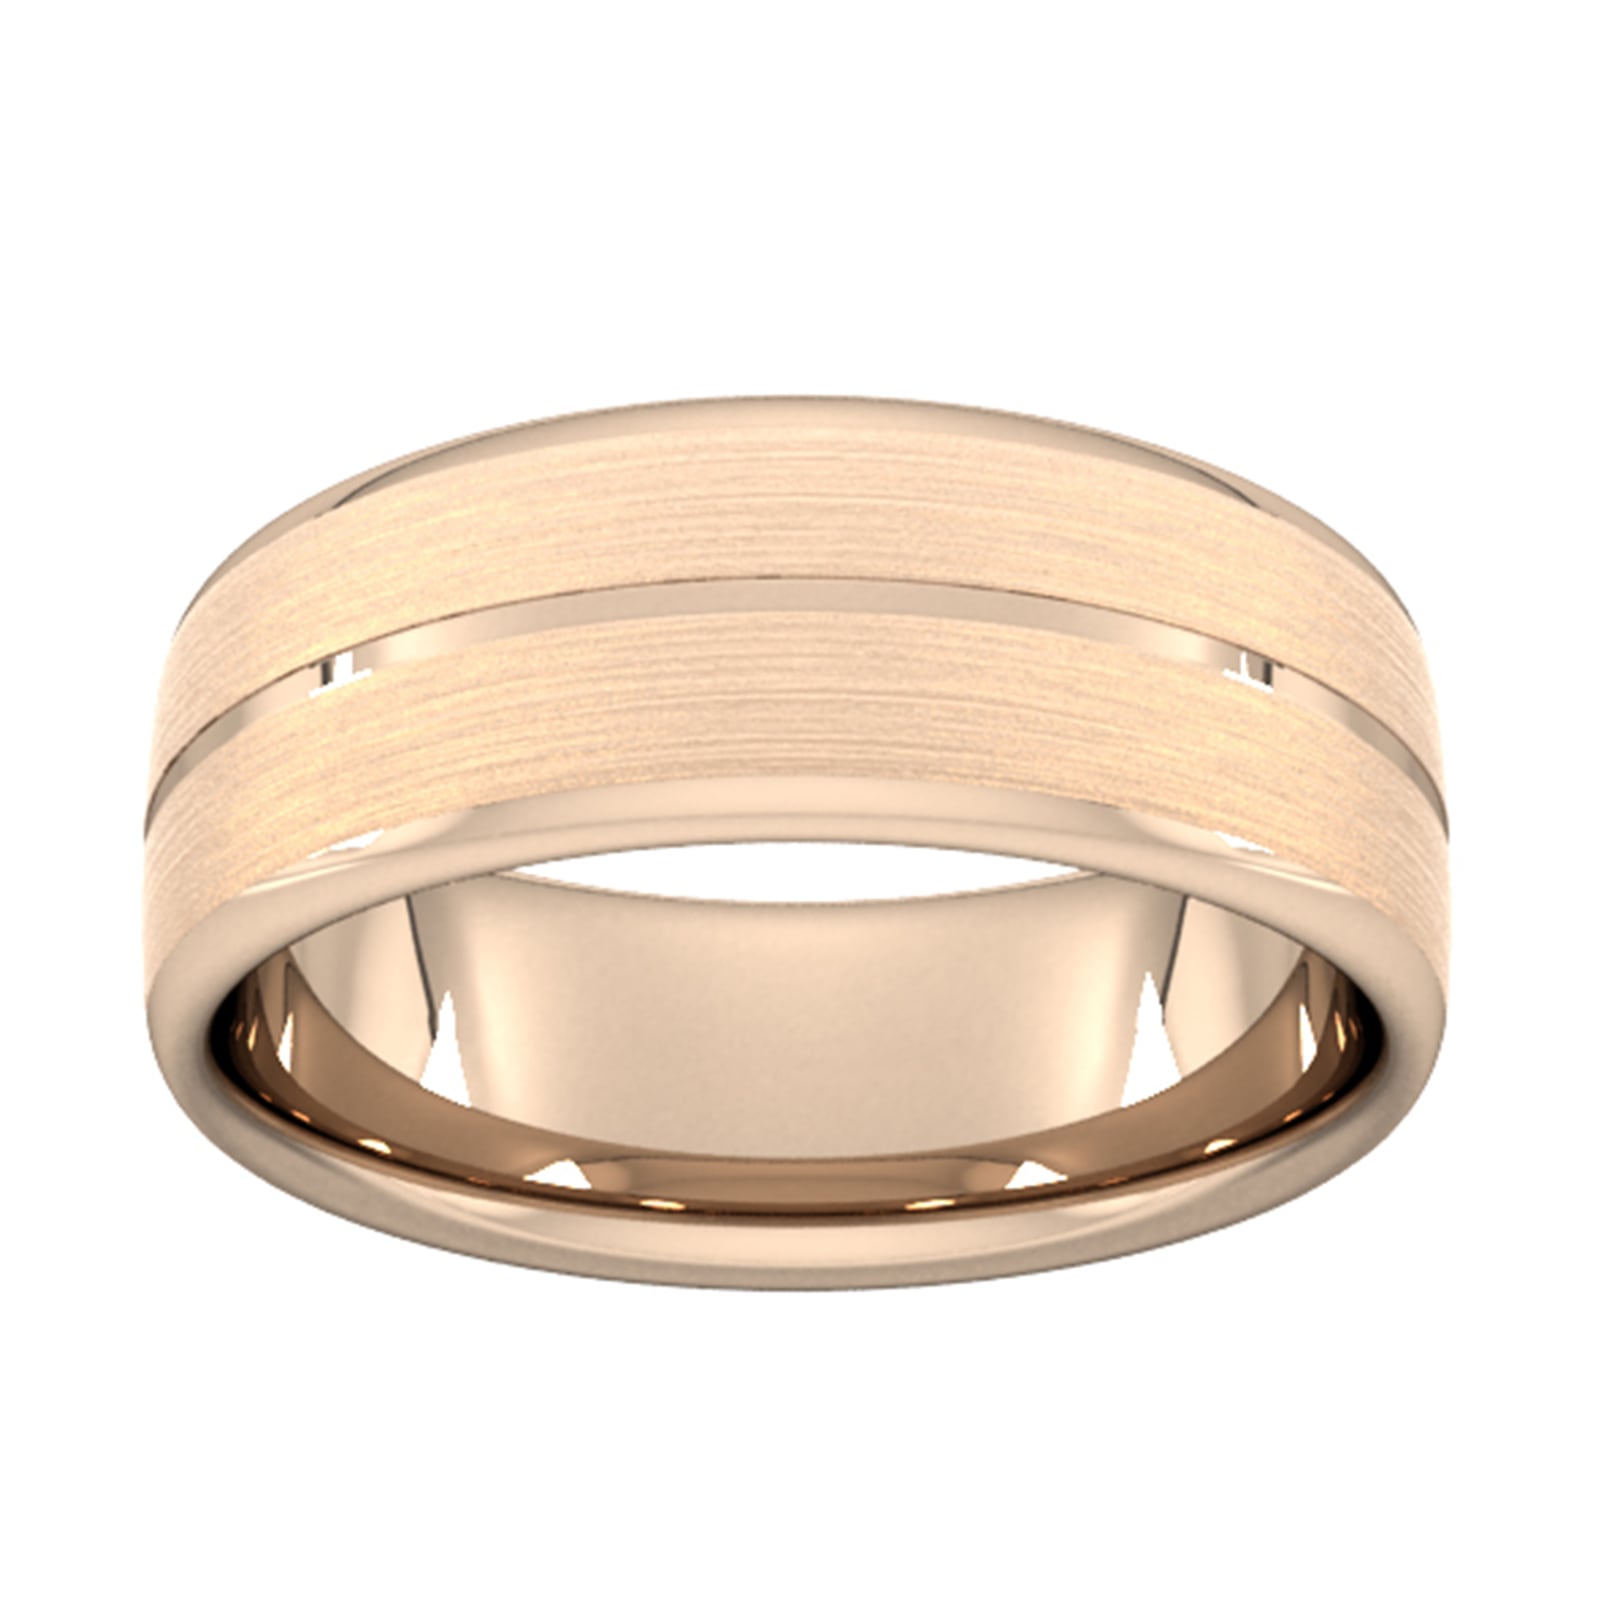 8mm Flat Court Heavy Centre Groove With Chamfered Edge Wedding Ring In 9 Carat Rose Gold - Ring Size Q